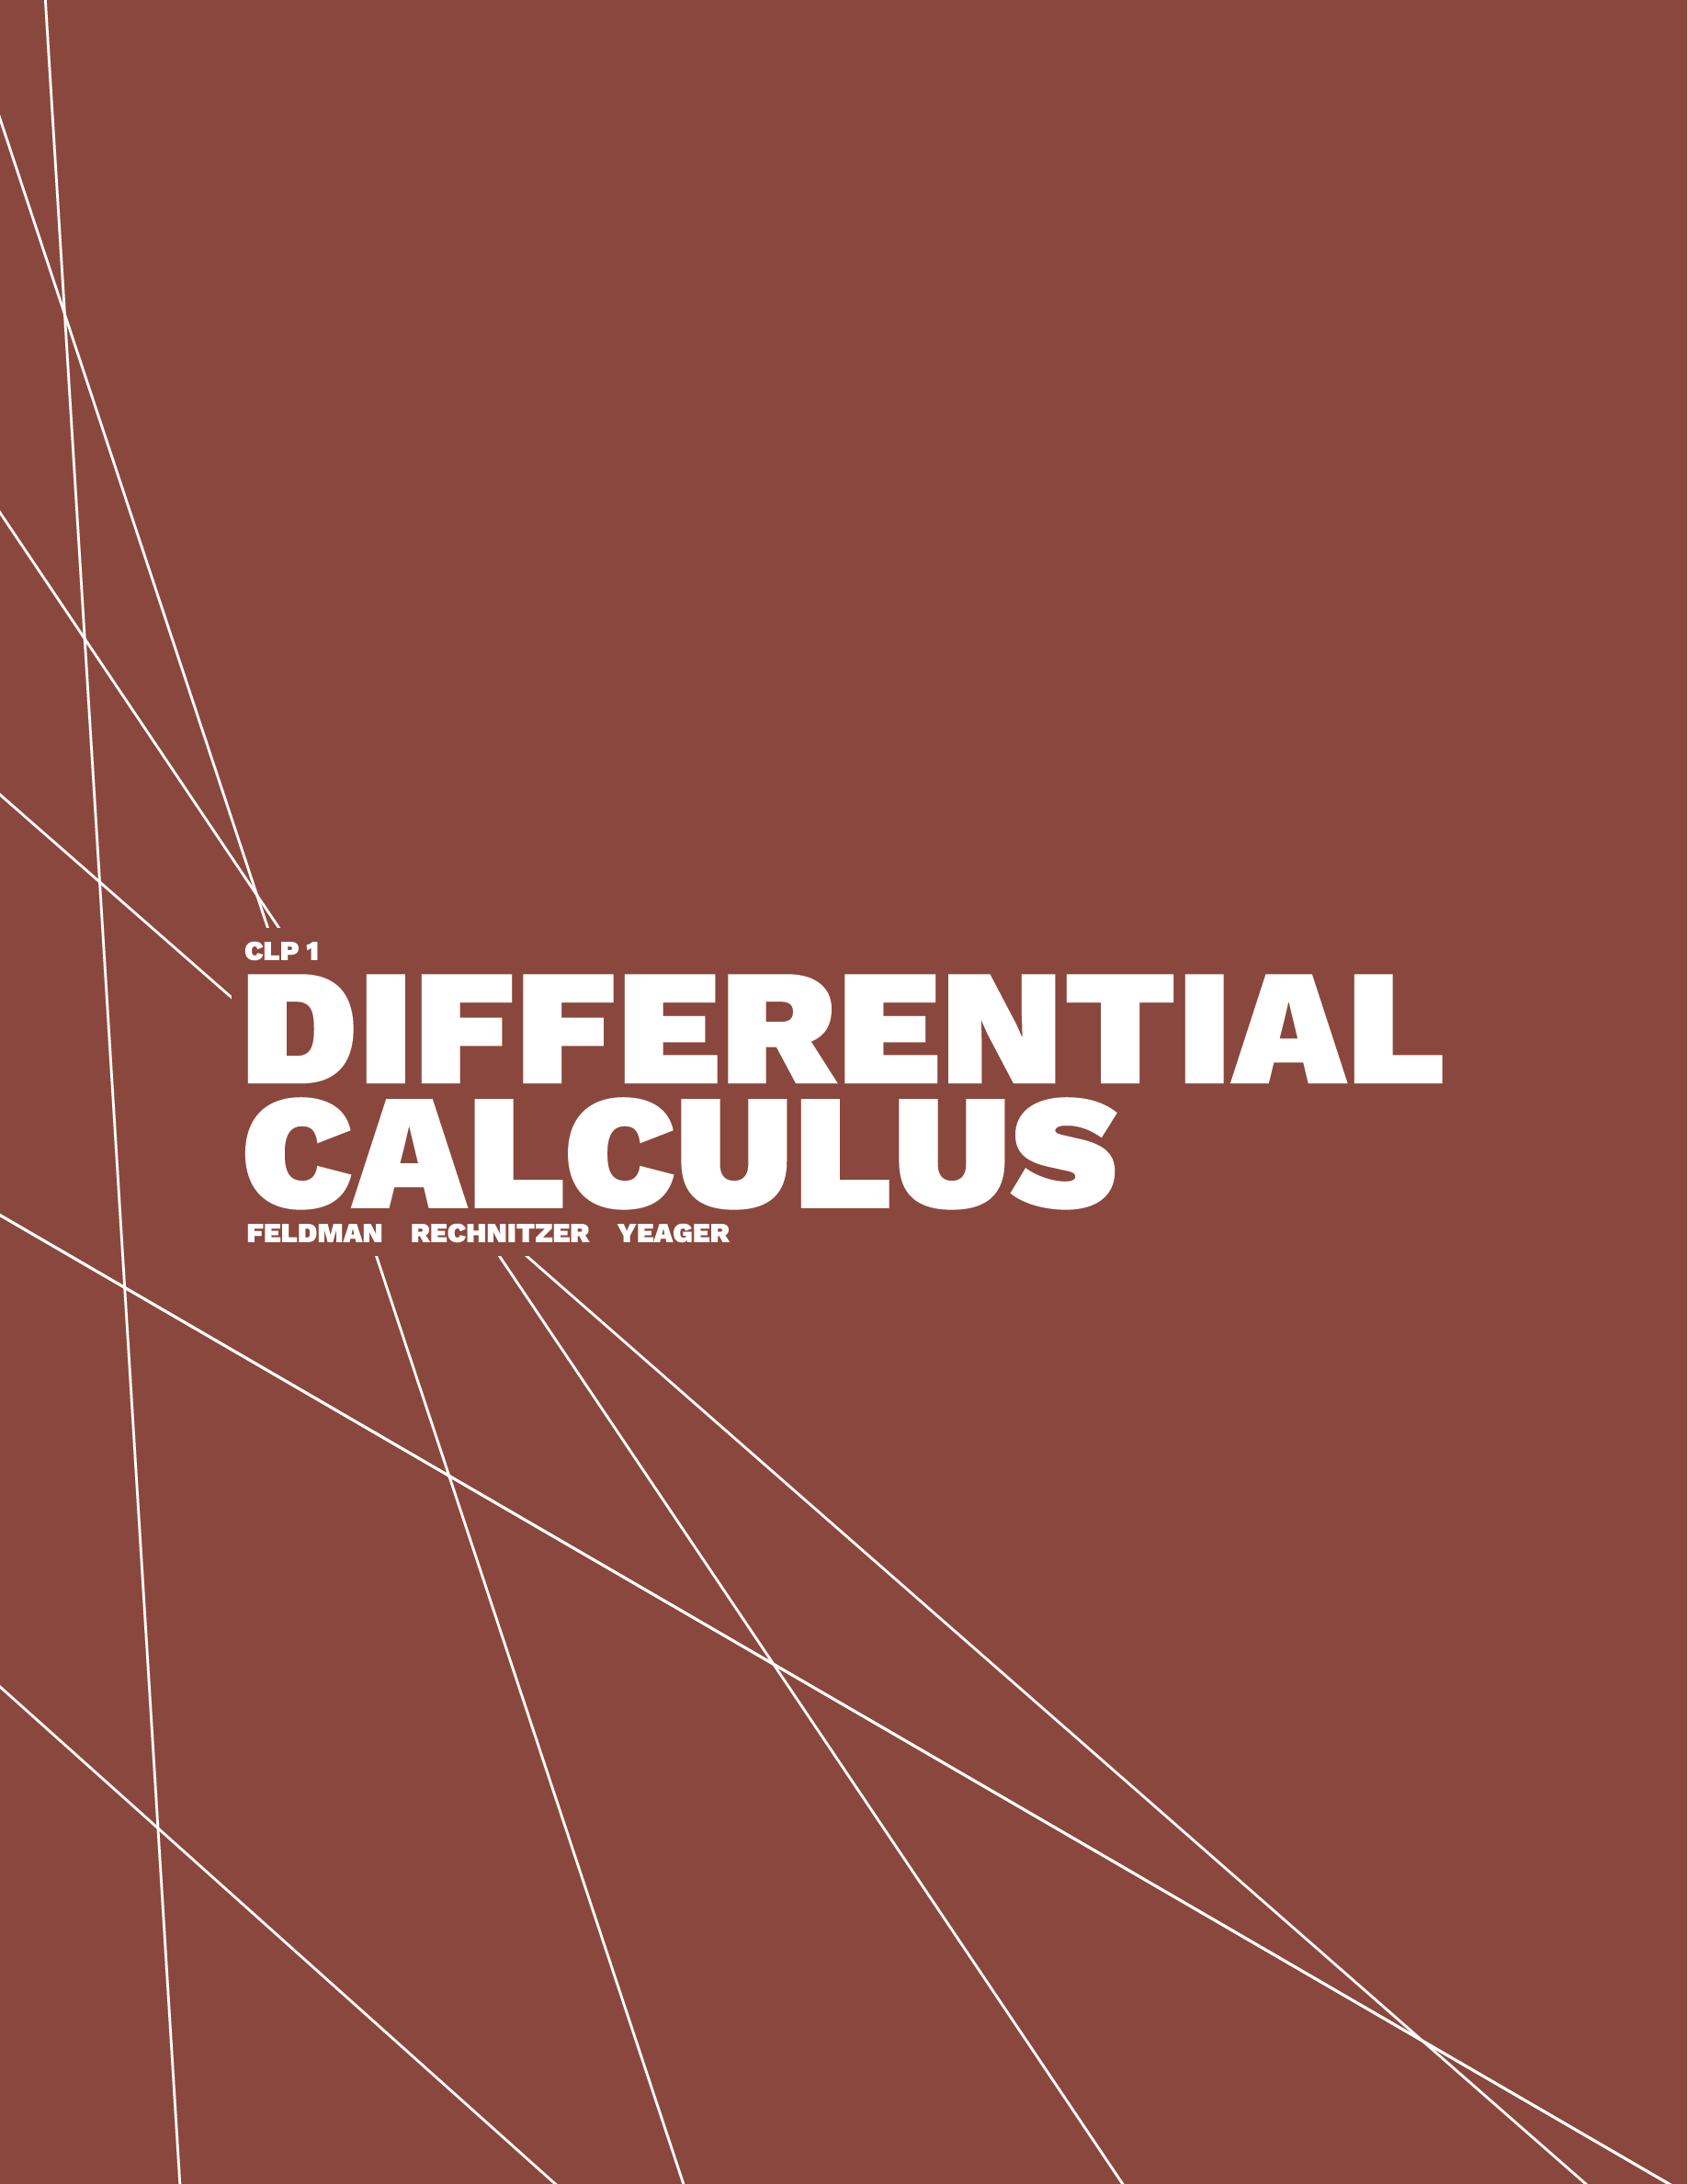 Differential Calculus textbook cover